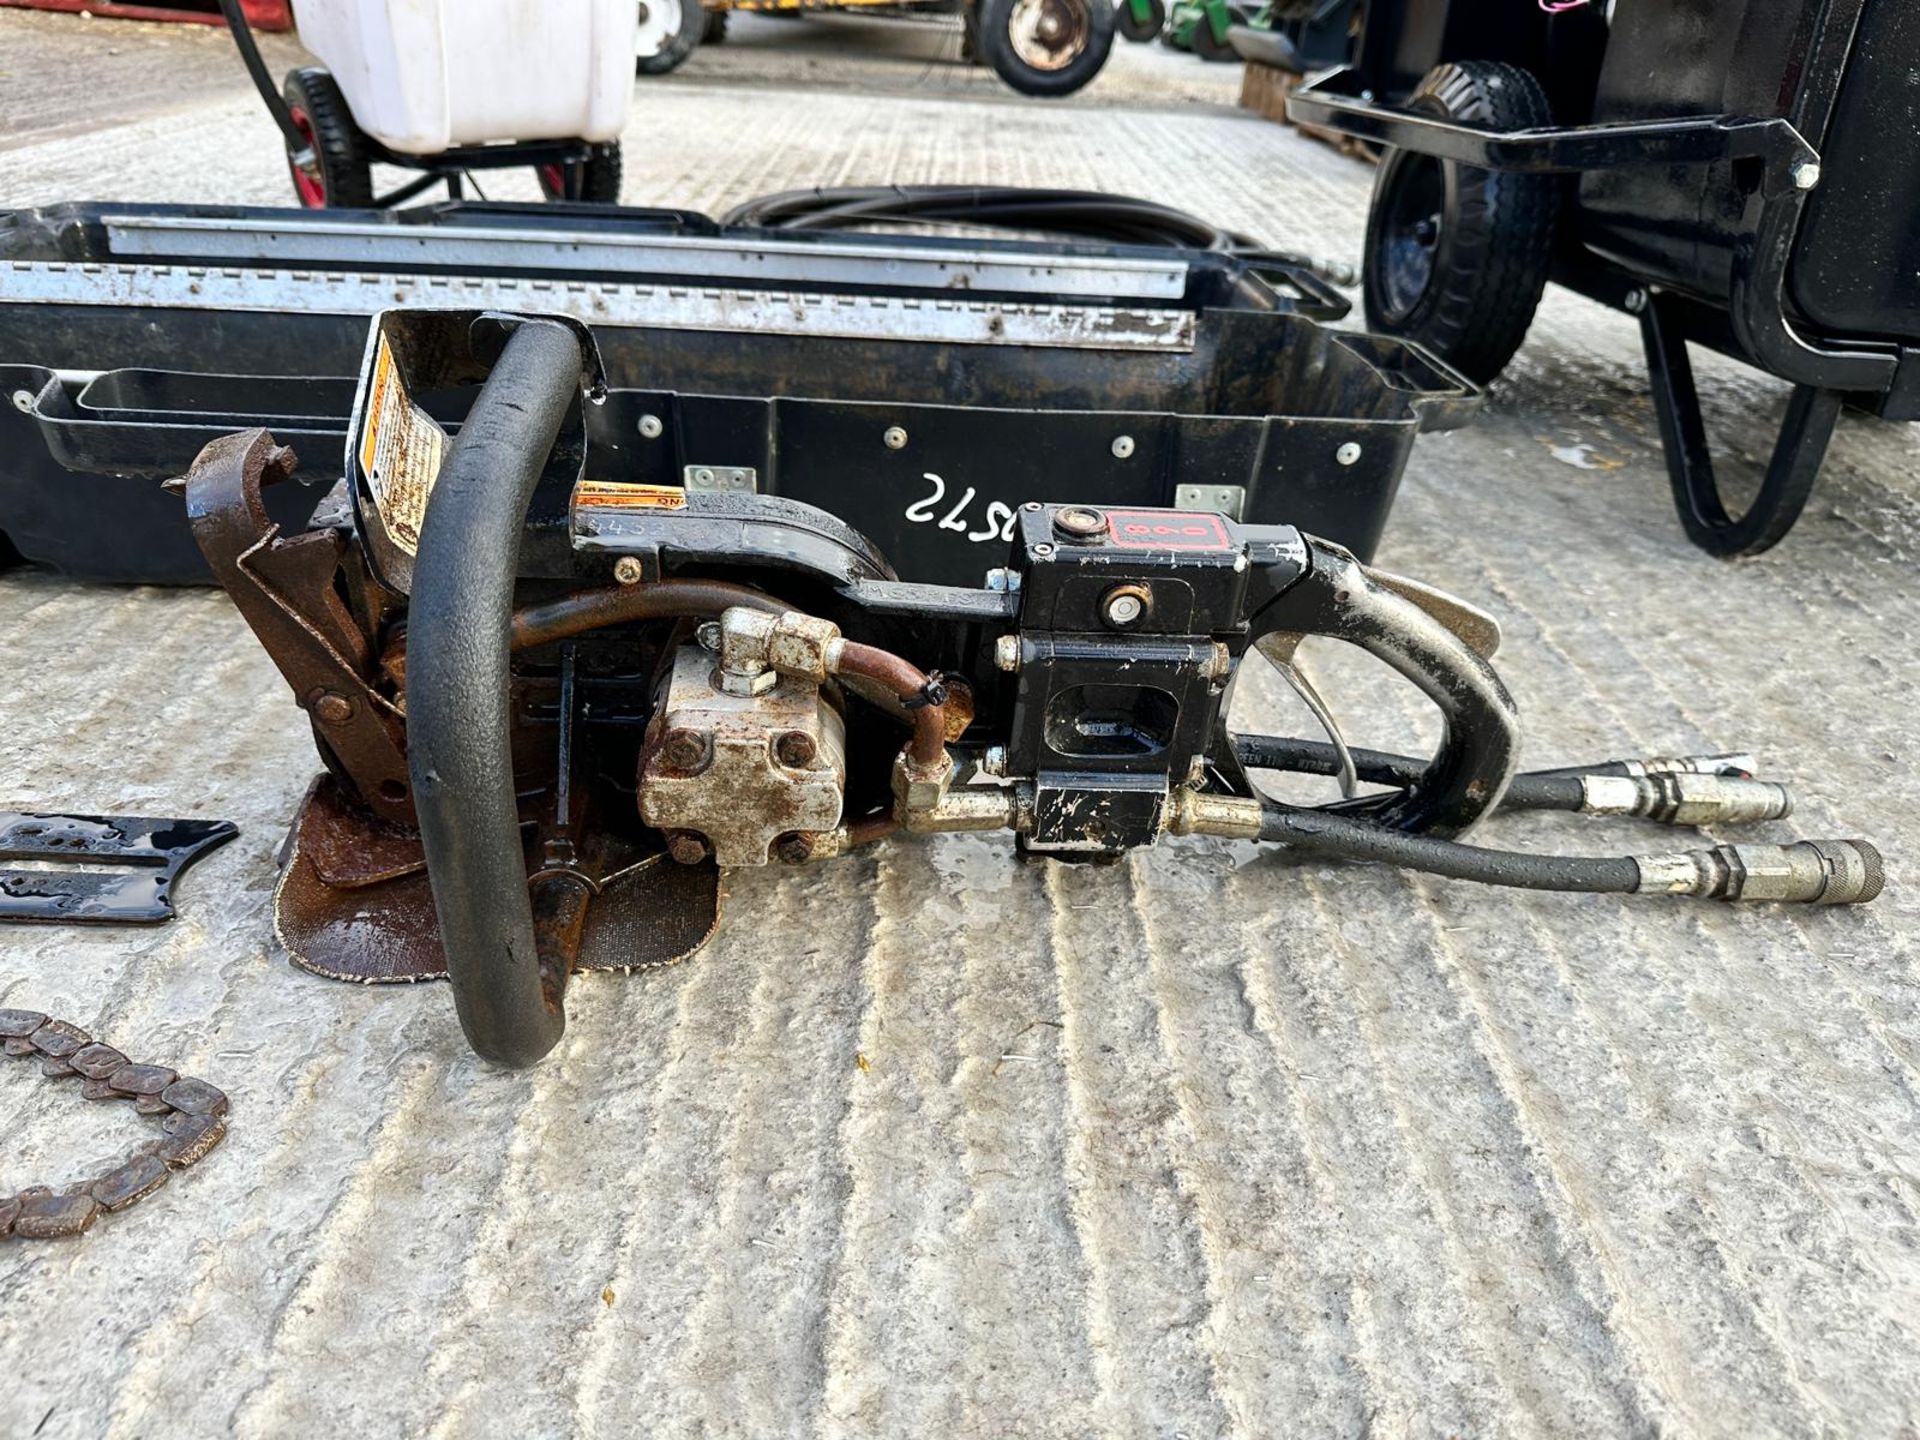 2018 ICS P95 Hydrualic Powerpack With ICS 890 Concrete Chainsaw And Hydrualic Pipes *PLUS VAT* - Image 4 of 16